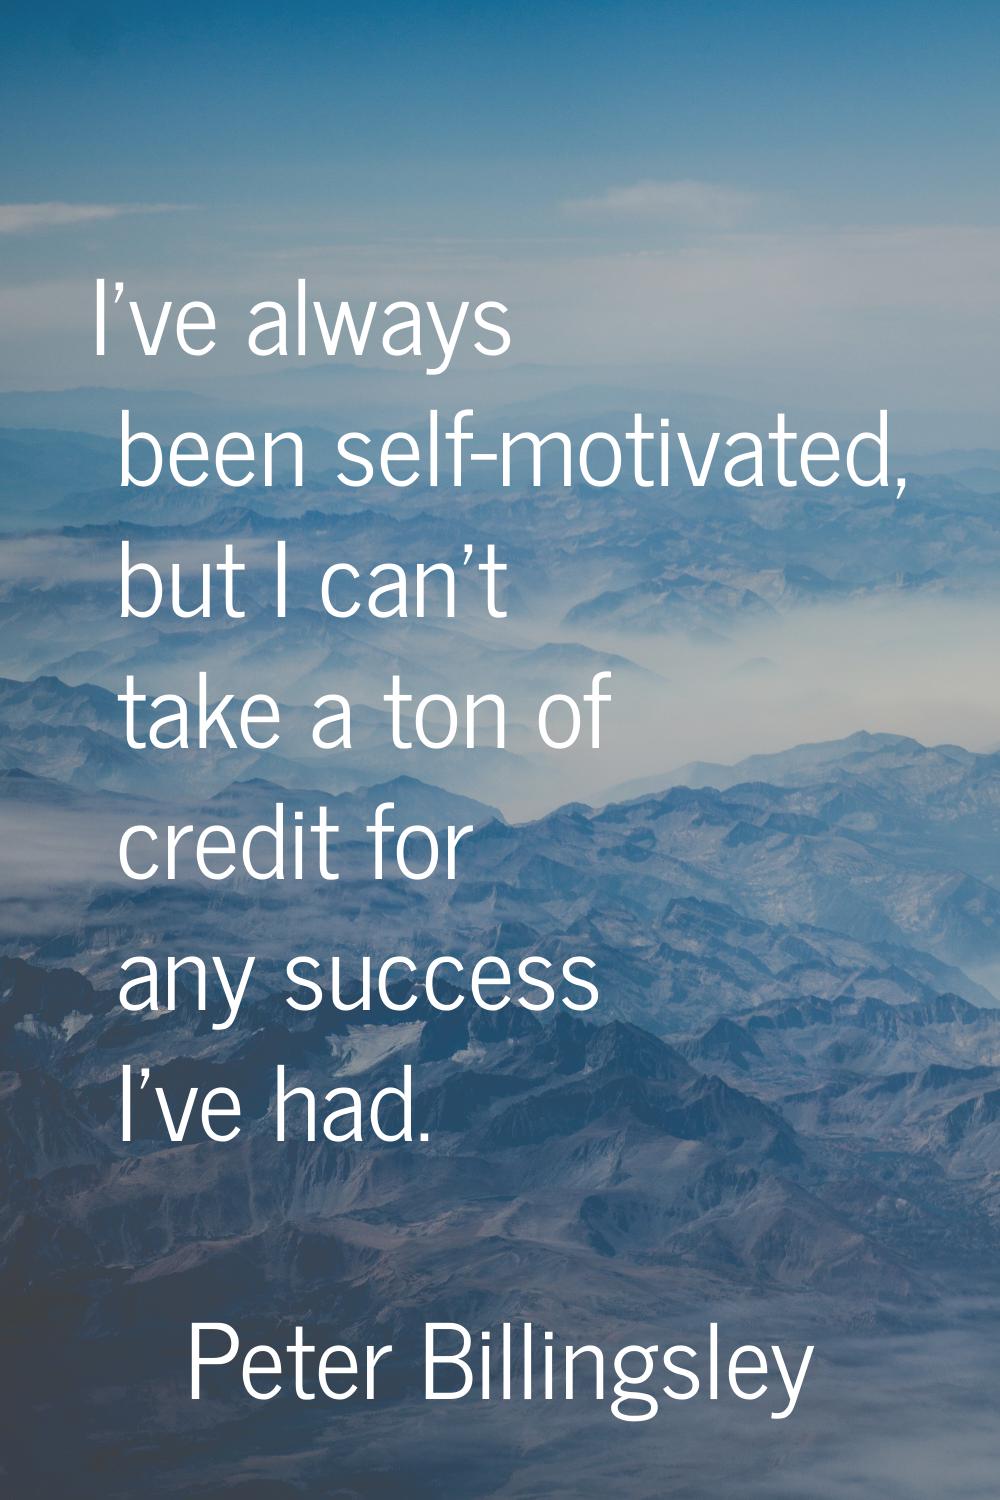 I've always been self-motivated, but I can't take a ton of credit for any success I've had.